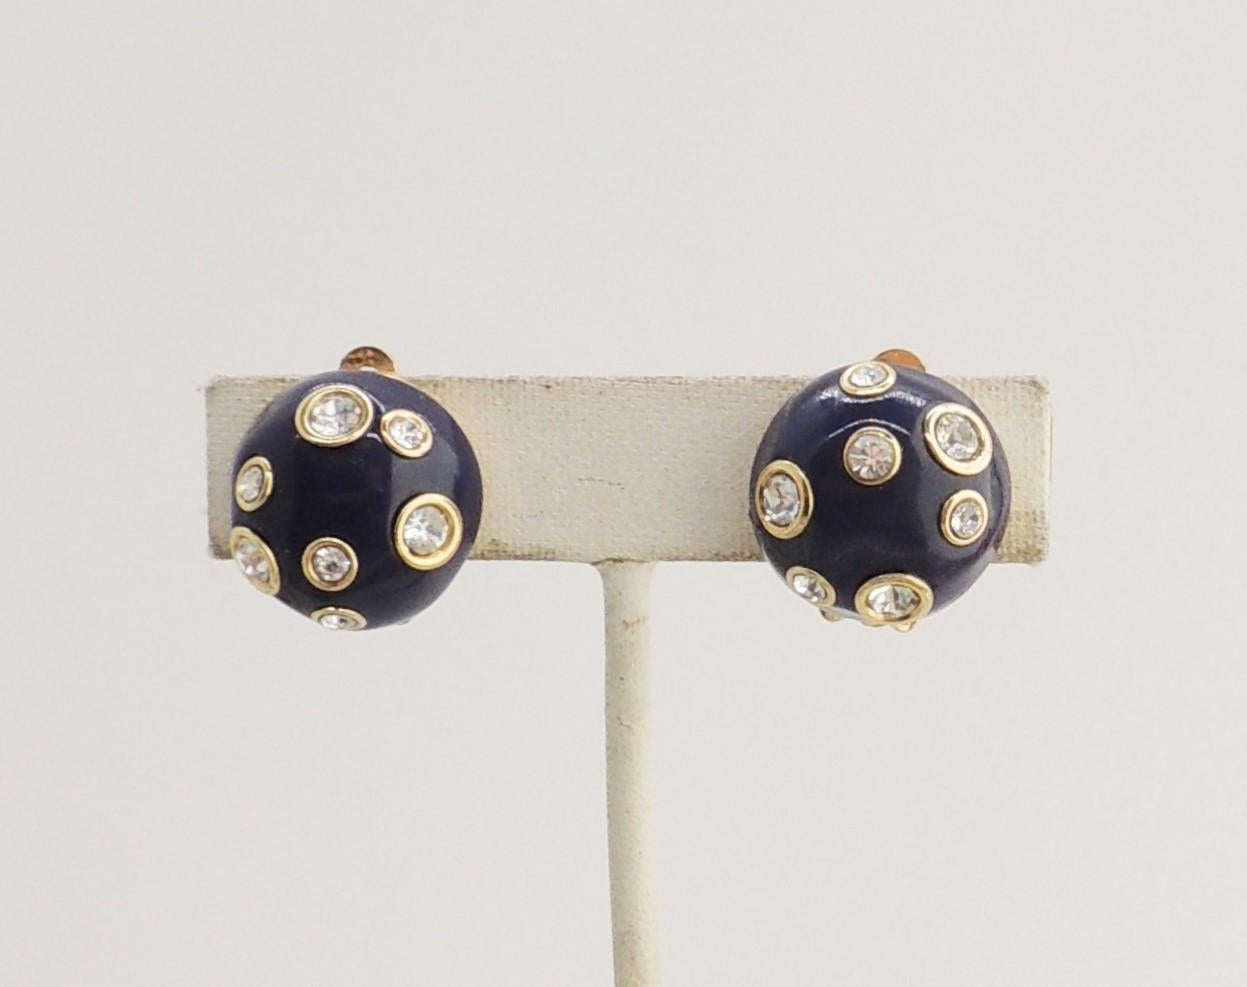 Goldtone round domed navy enamel with clear rhinestones clip earrings. Marked with Valentino Garavani's 